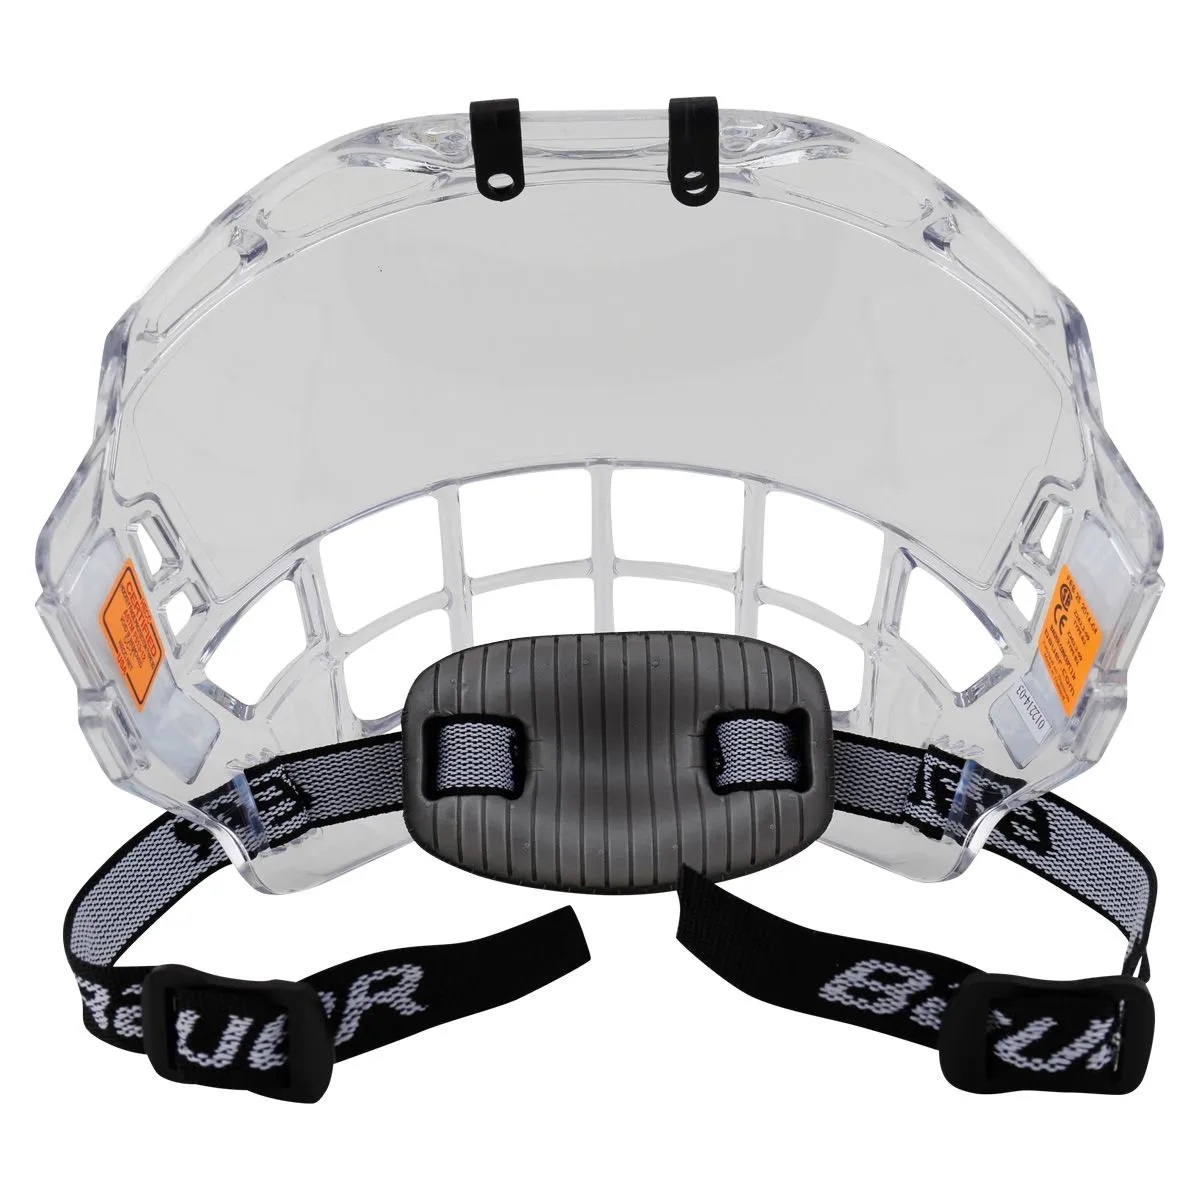 Bauer Concept 3 Jr. Full Shieldproduct zoom image #4